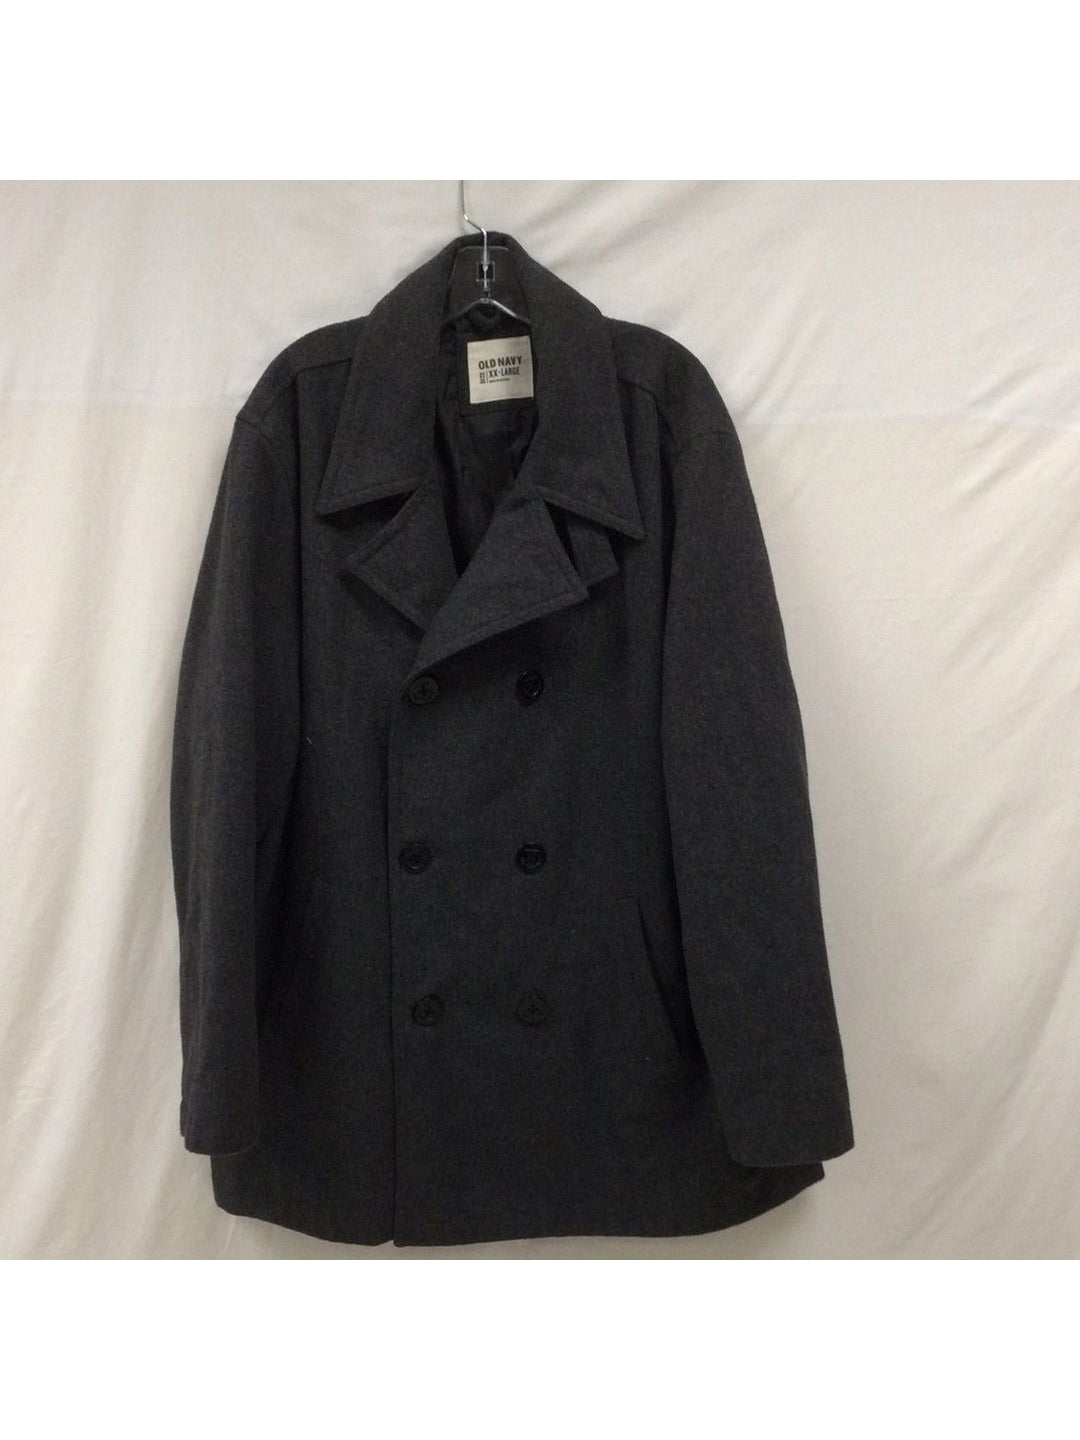 Old Navy Ladies Grey X X Large Blazer - The Kennedy Collective Thrift - 